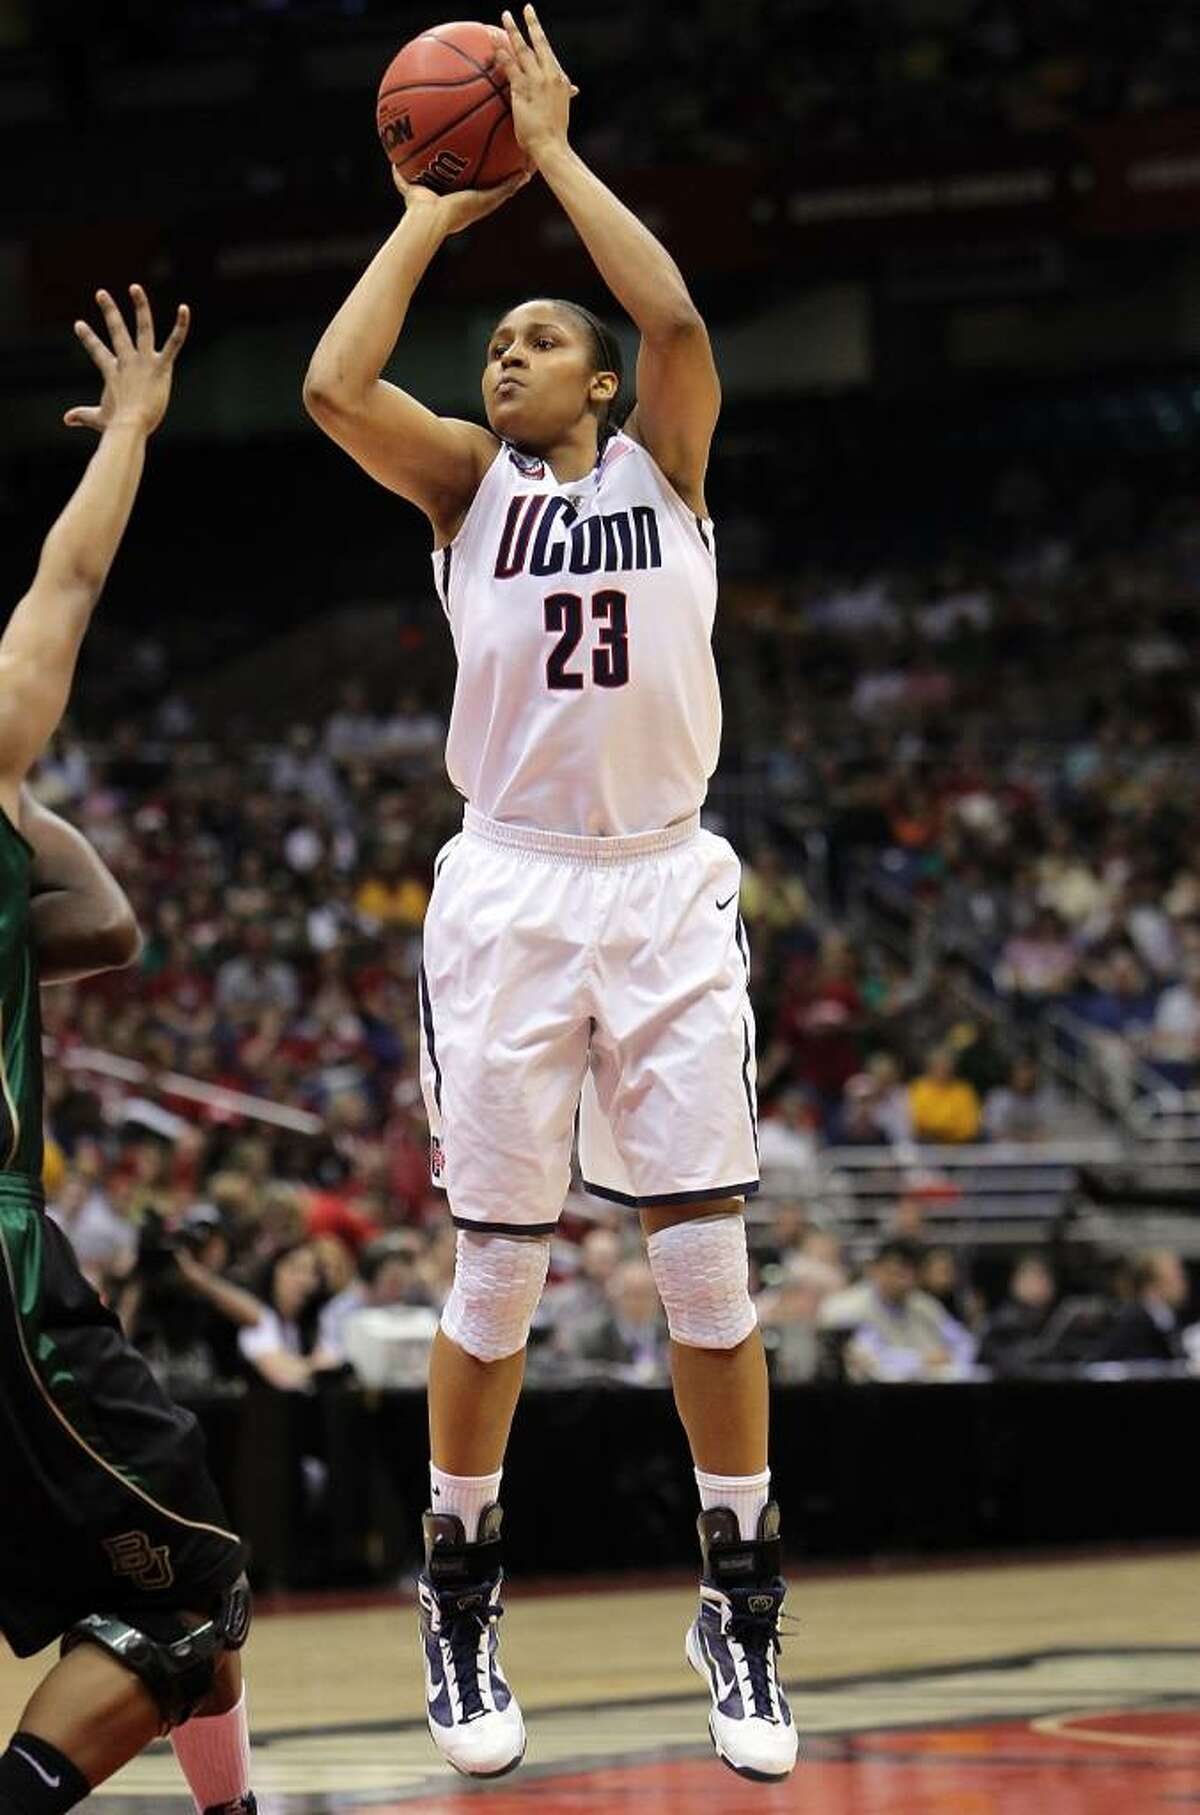 SAN ANTONIO - APRIL 04: Forward Maya Moore #23 of the Connecticut Huskies takes a shot against the Baylor Bears during the Women's Final Four Semifinals at the Alamodome on April 4, 2010 in San Antonio, Texas. (Photo by Ronald Martinez/Getty Images) *** Local Caption *** Maya Moore